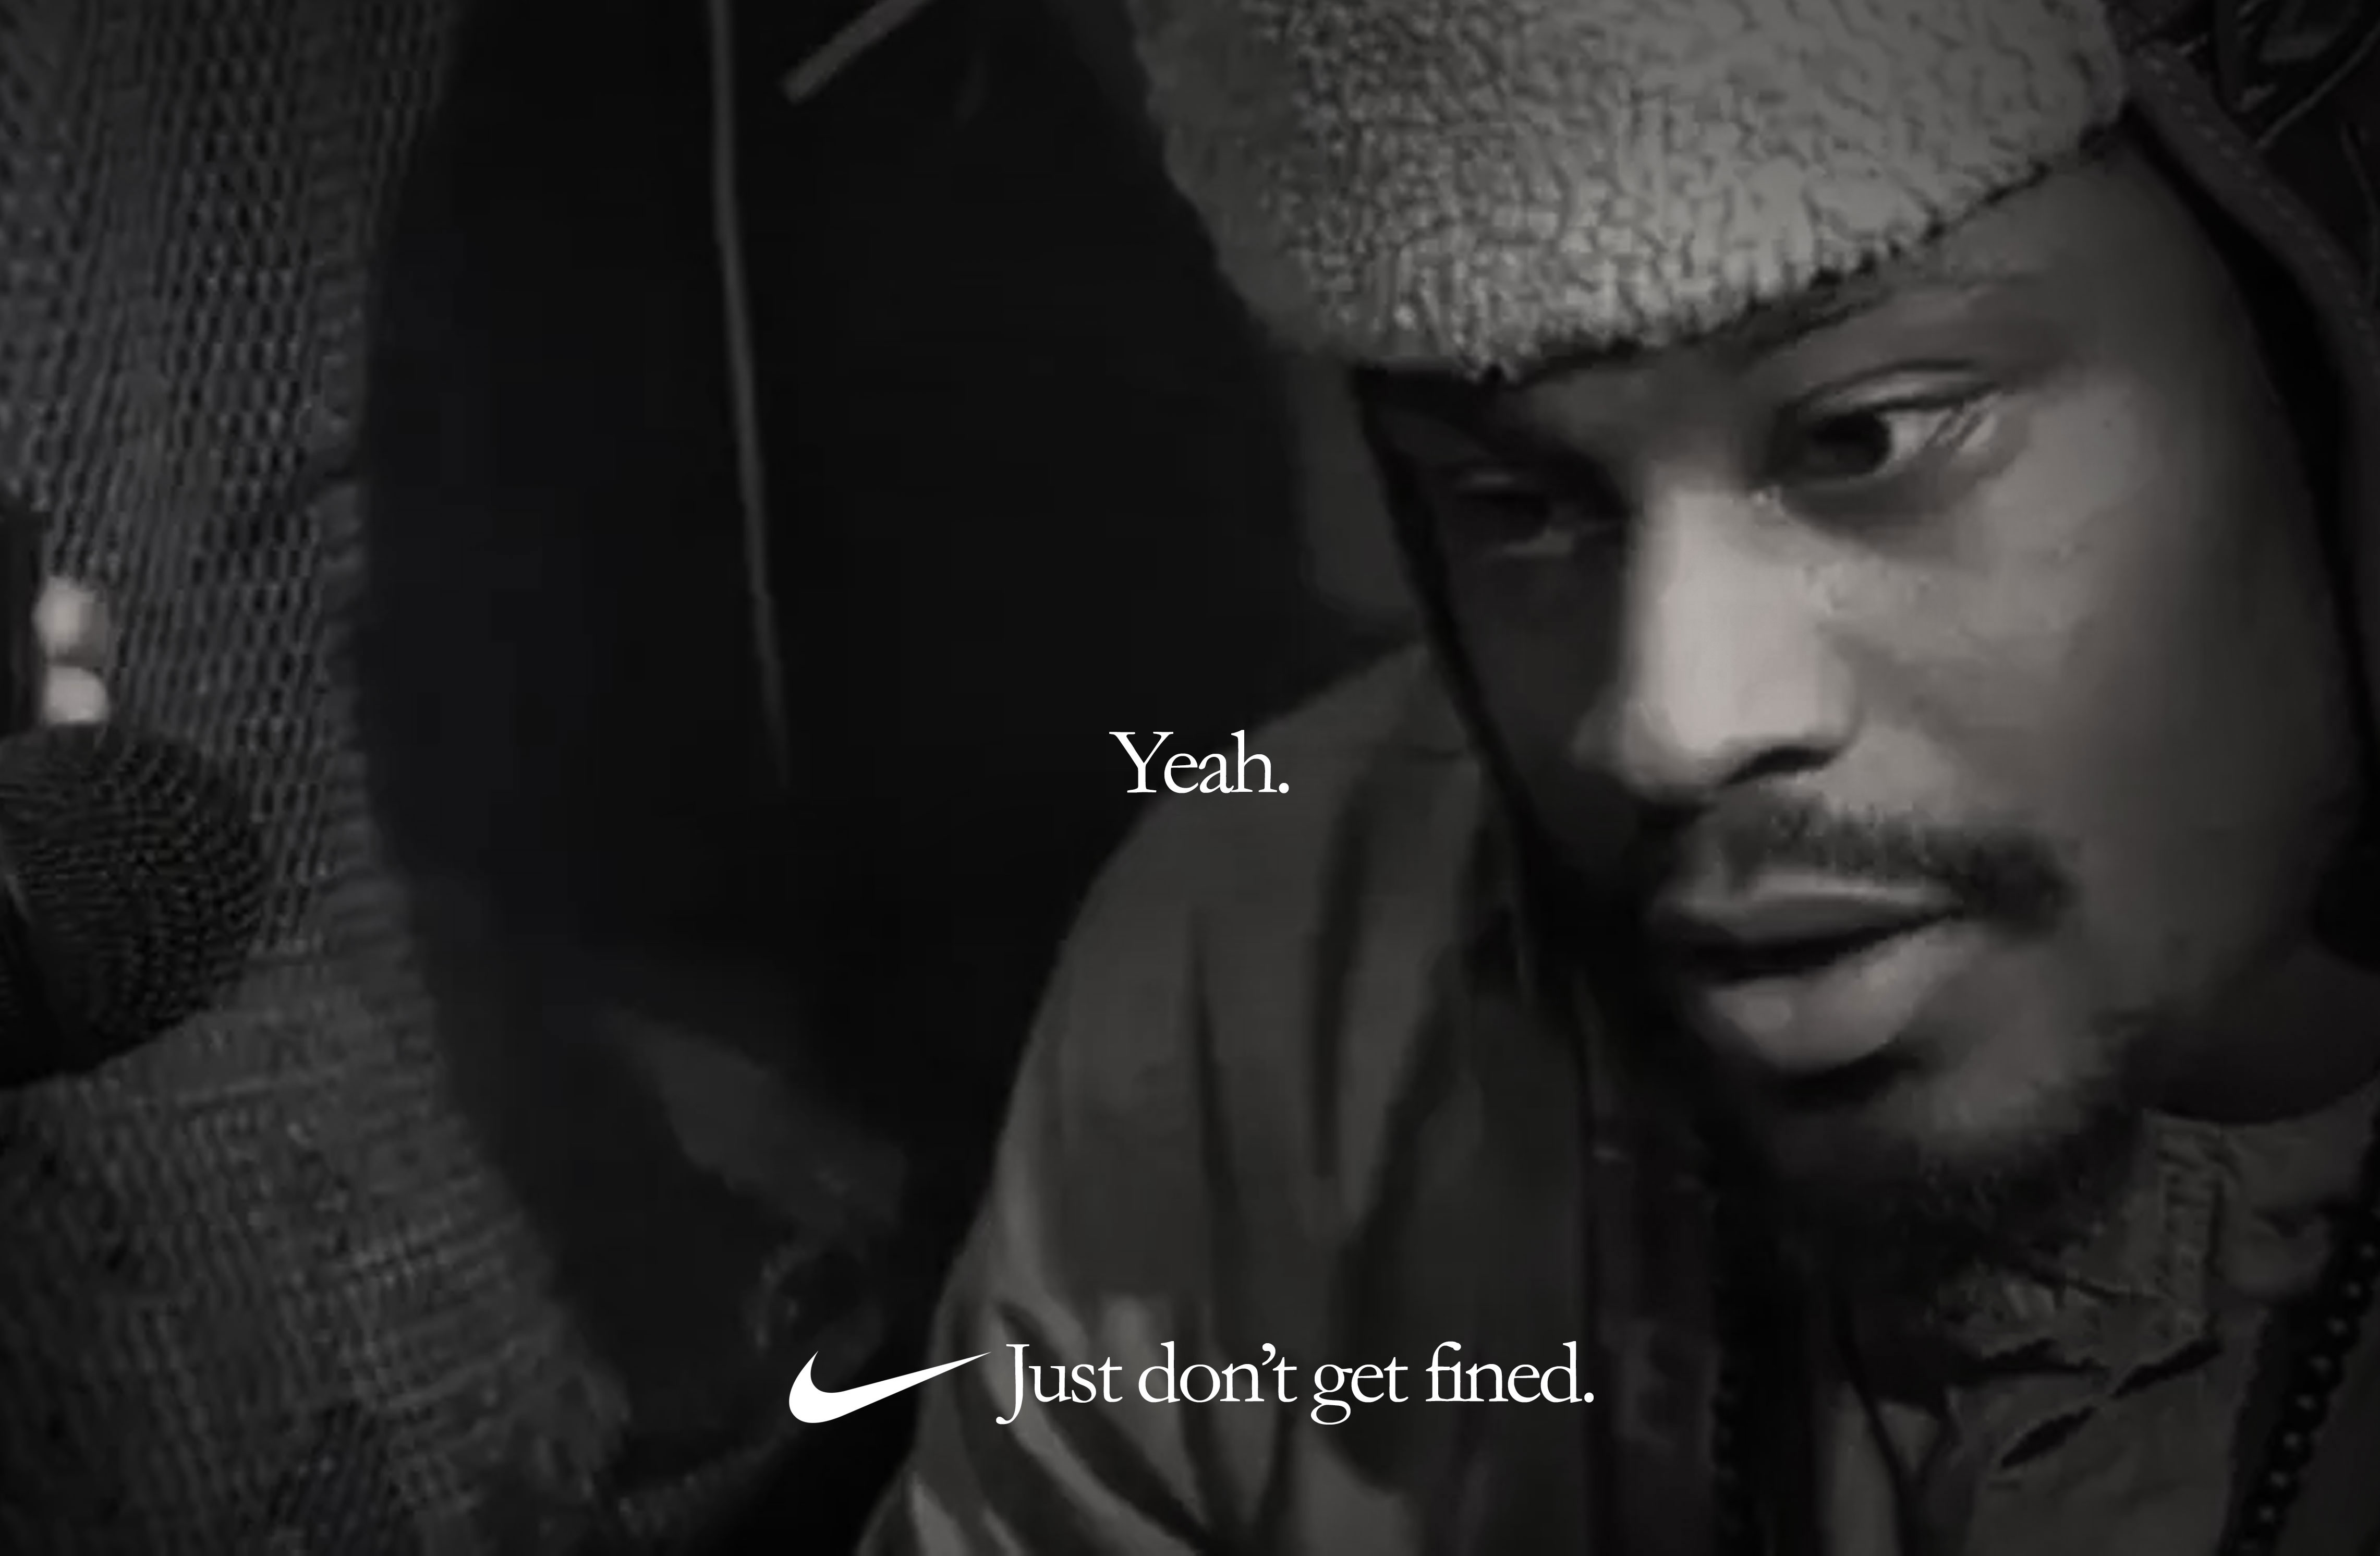 26 Hilarious Nike "Believe in Something" Ad Spoofs